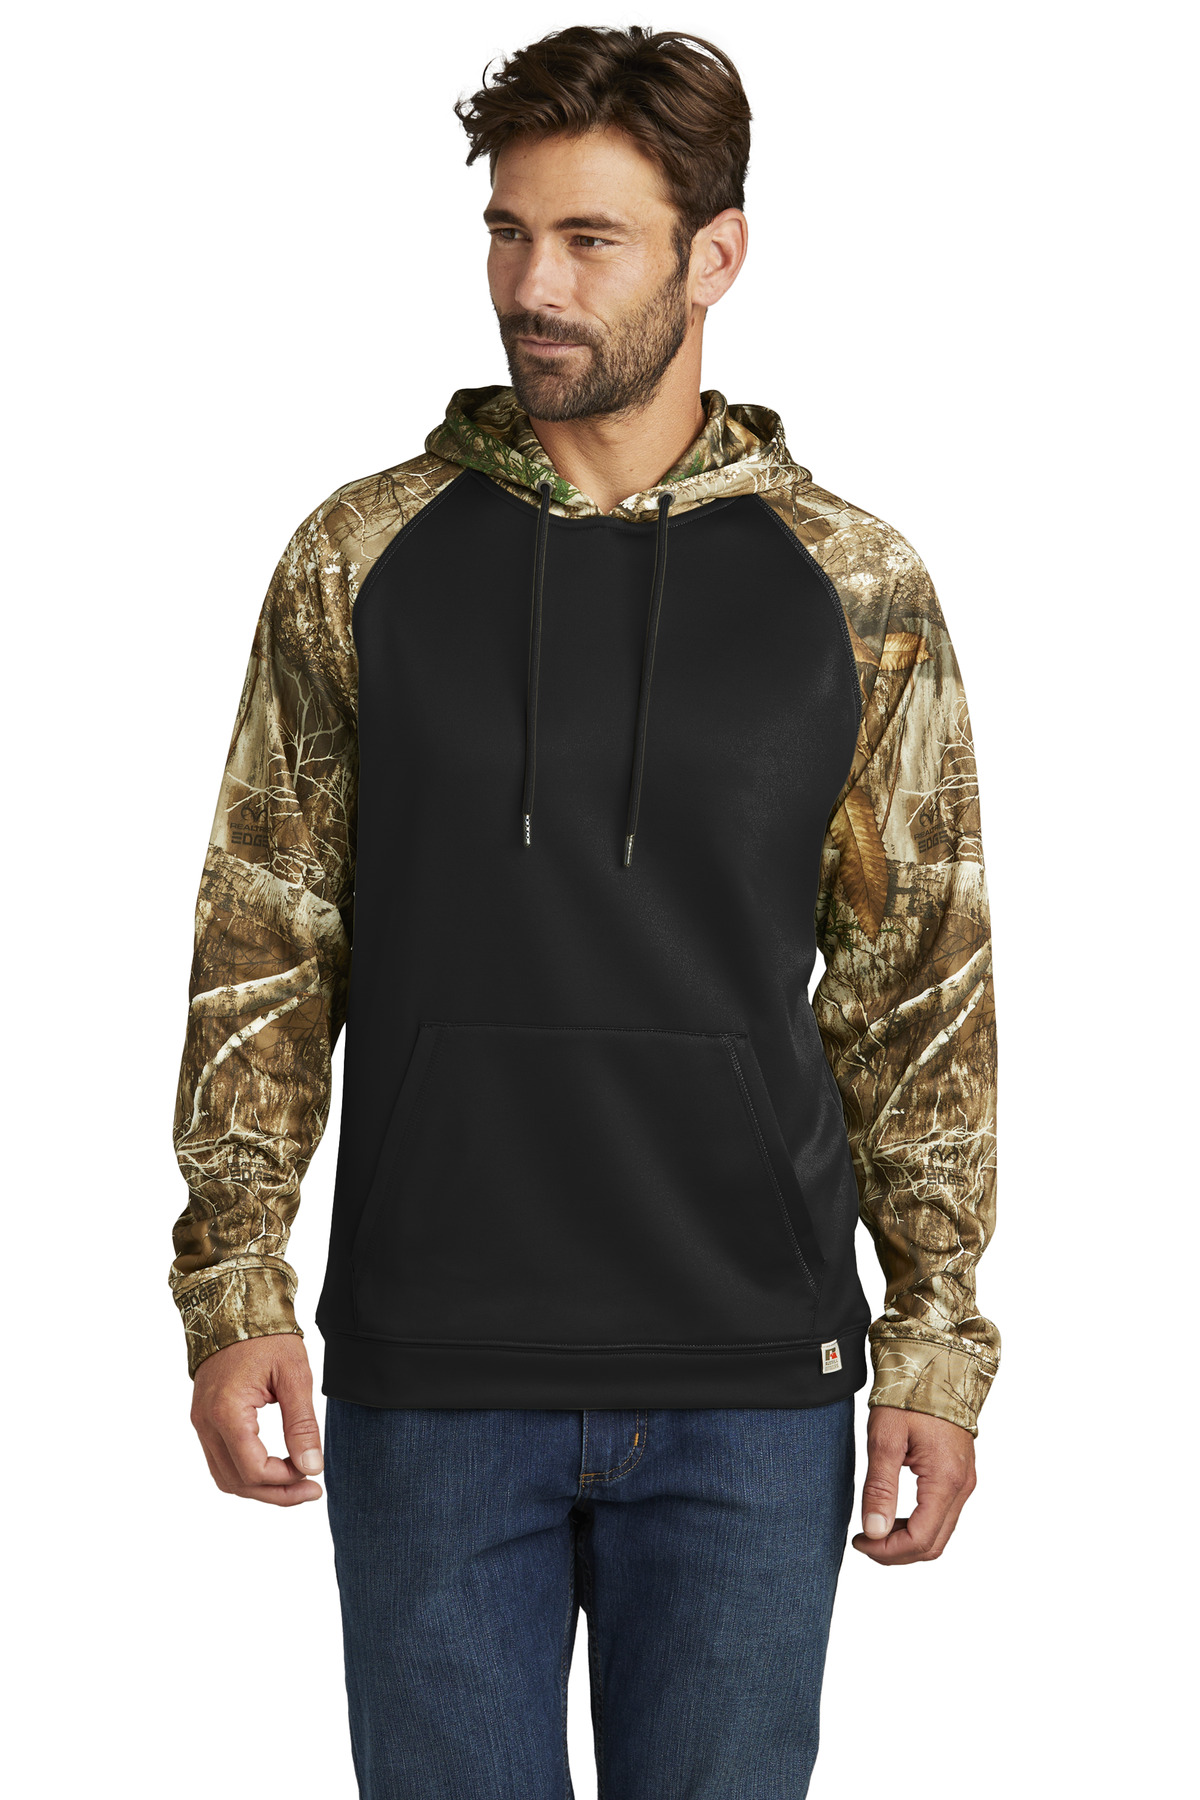 Russell Outdoors Realtree Performance Colorblock Pullover Hoodie-Russell Outdoors